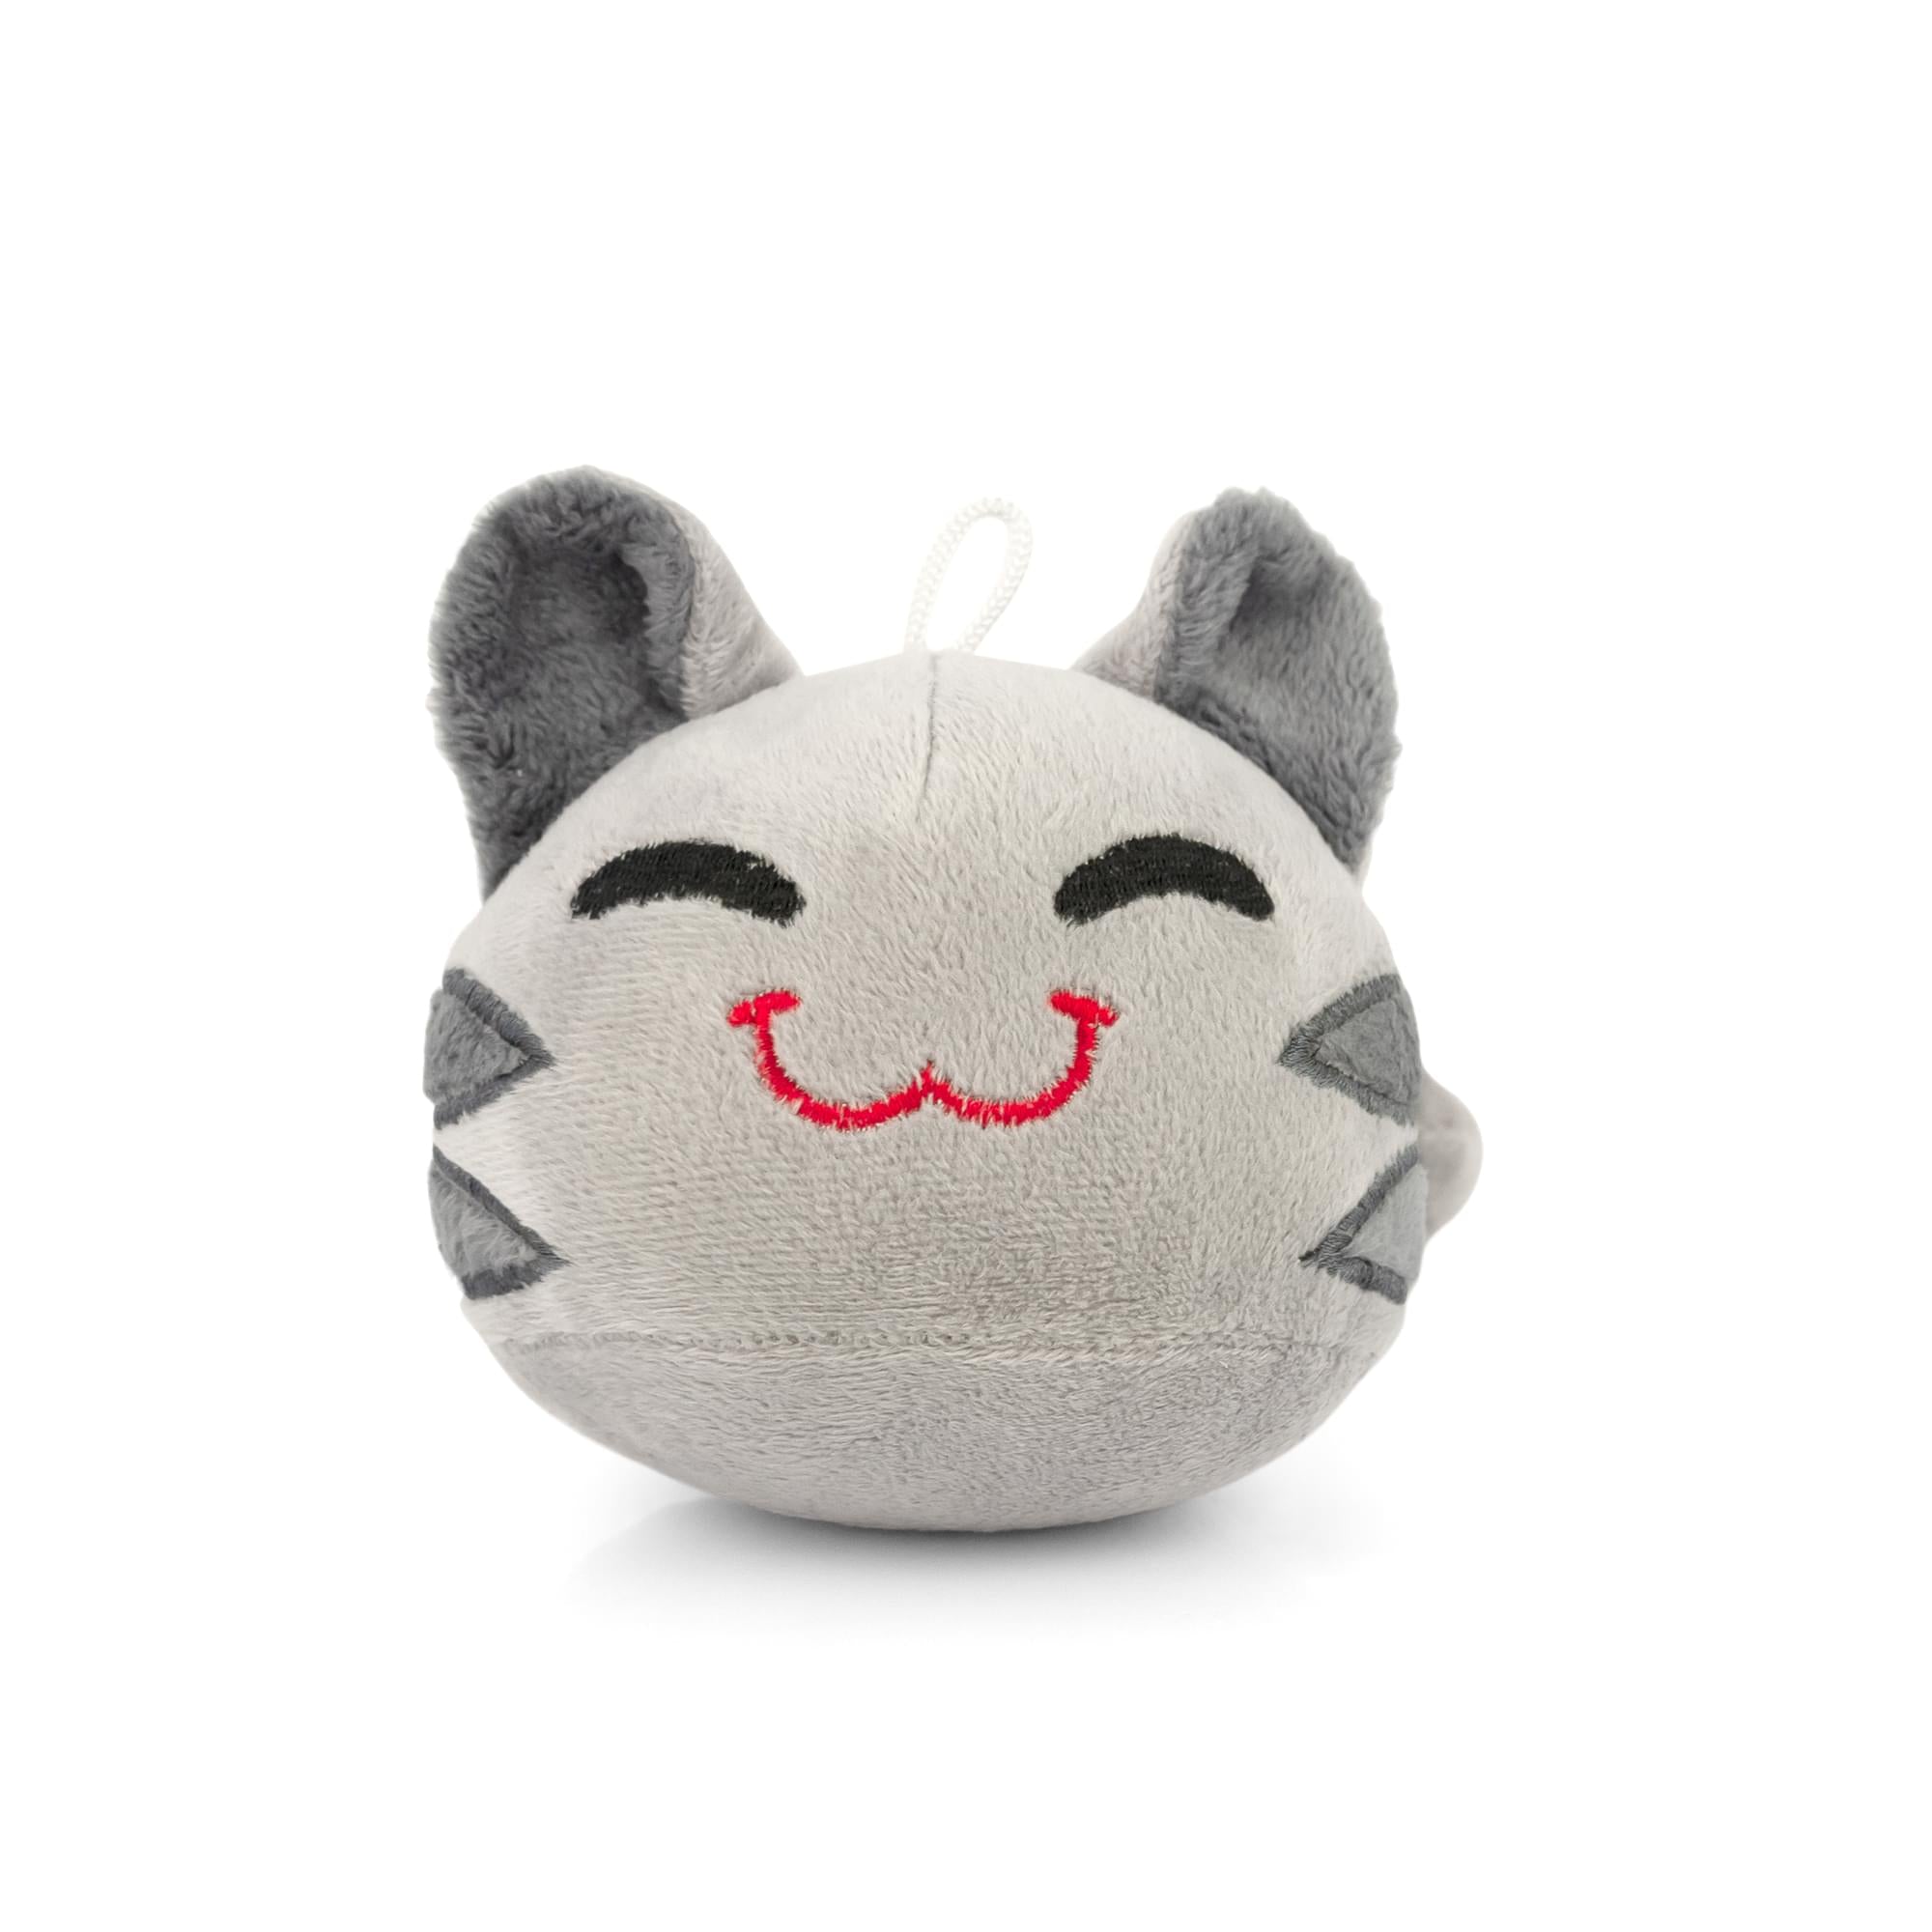 Slime Rancher Plush Toy Bean Bag Plushie , Tabby Slime, By Imaginary People